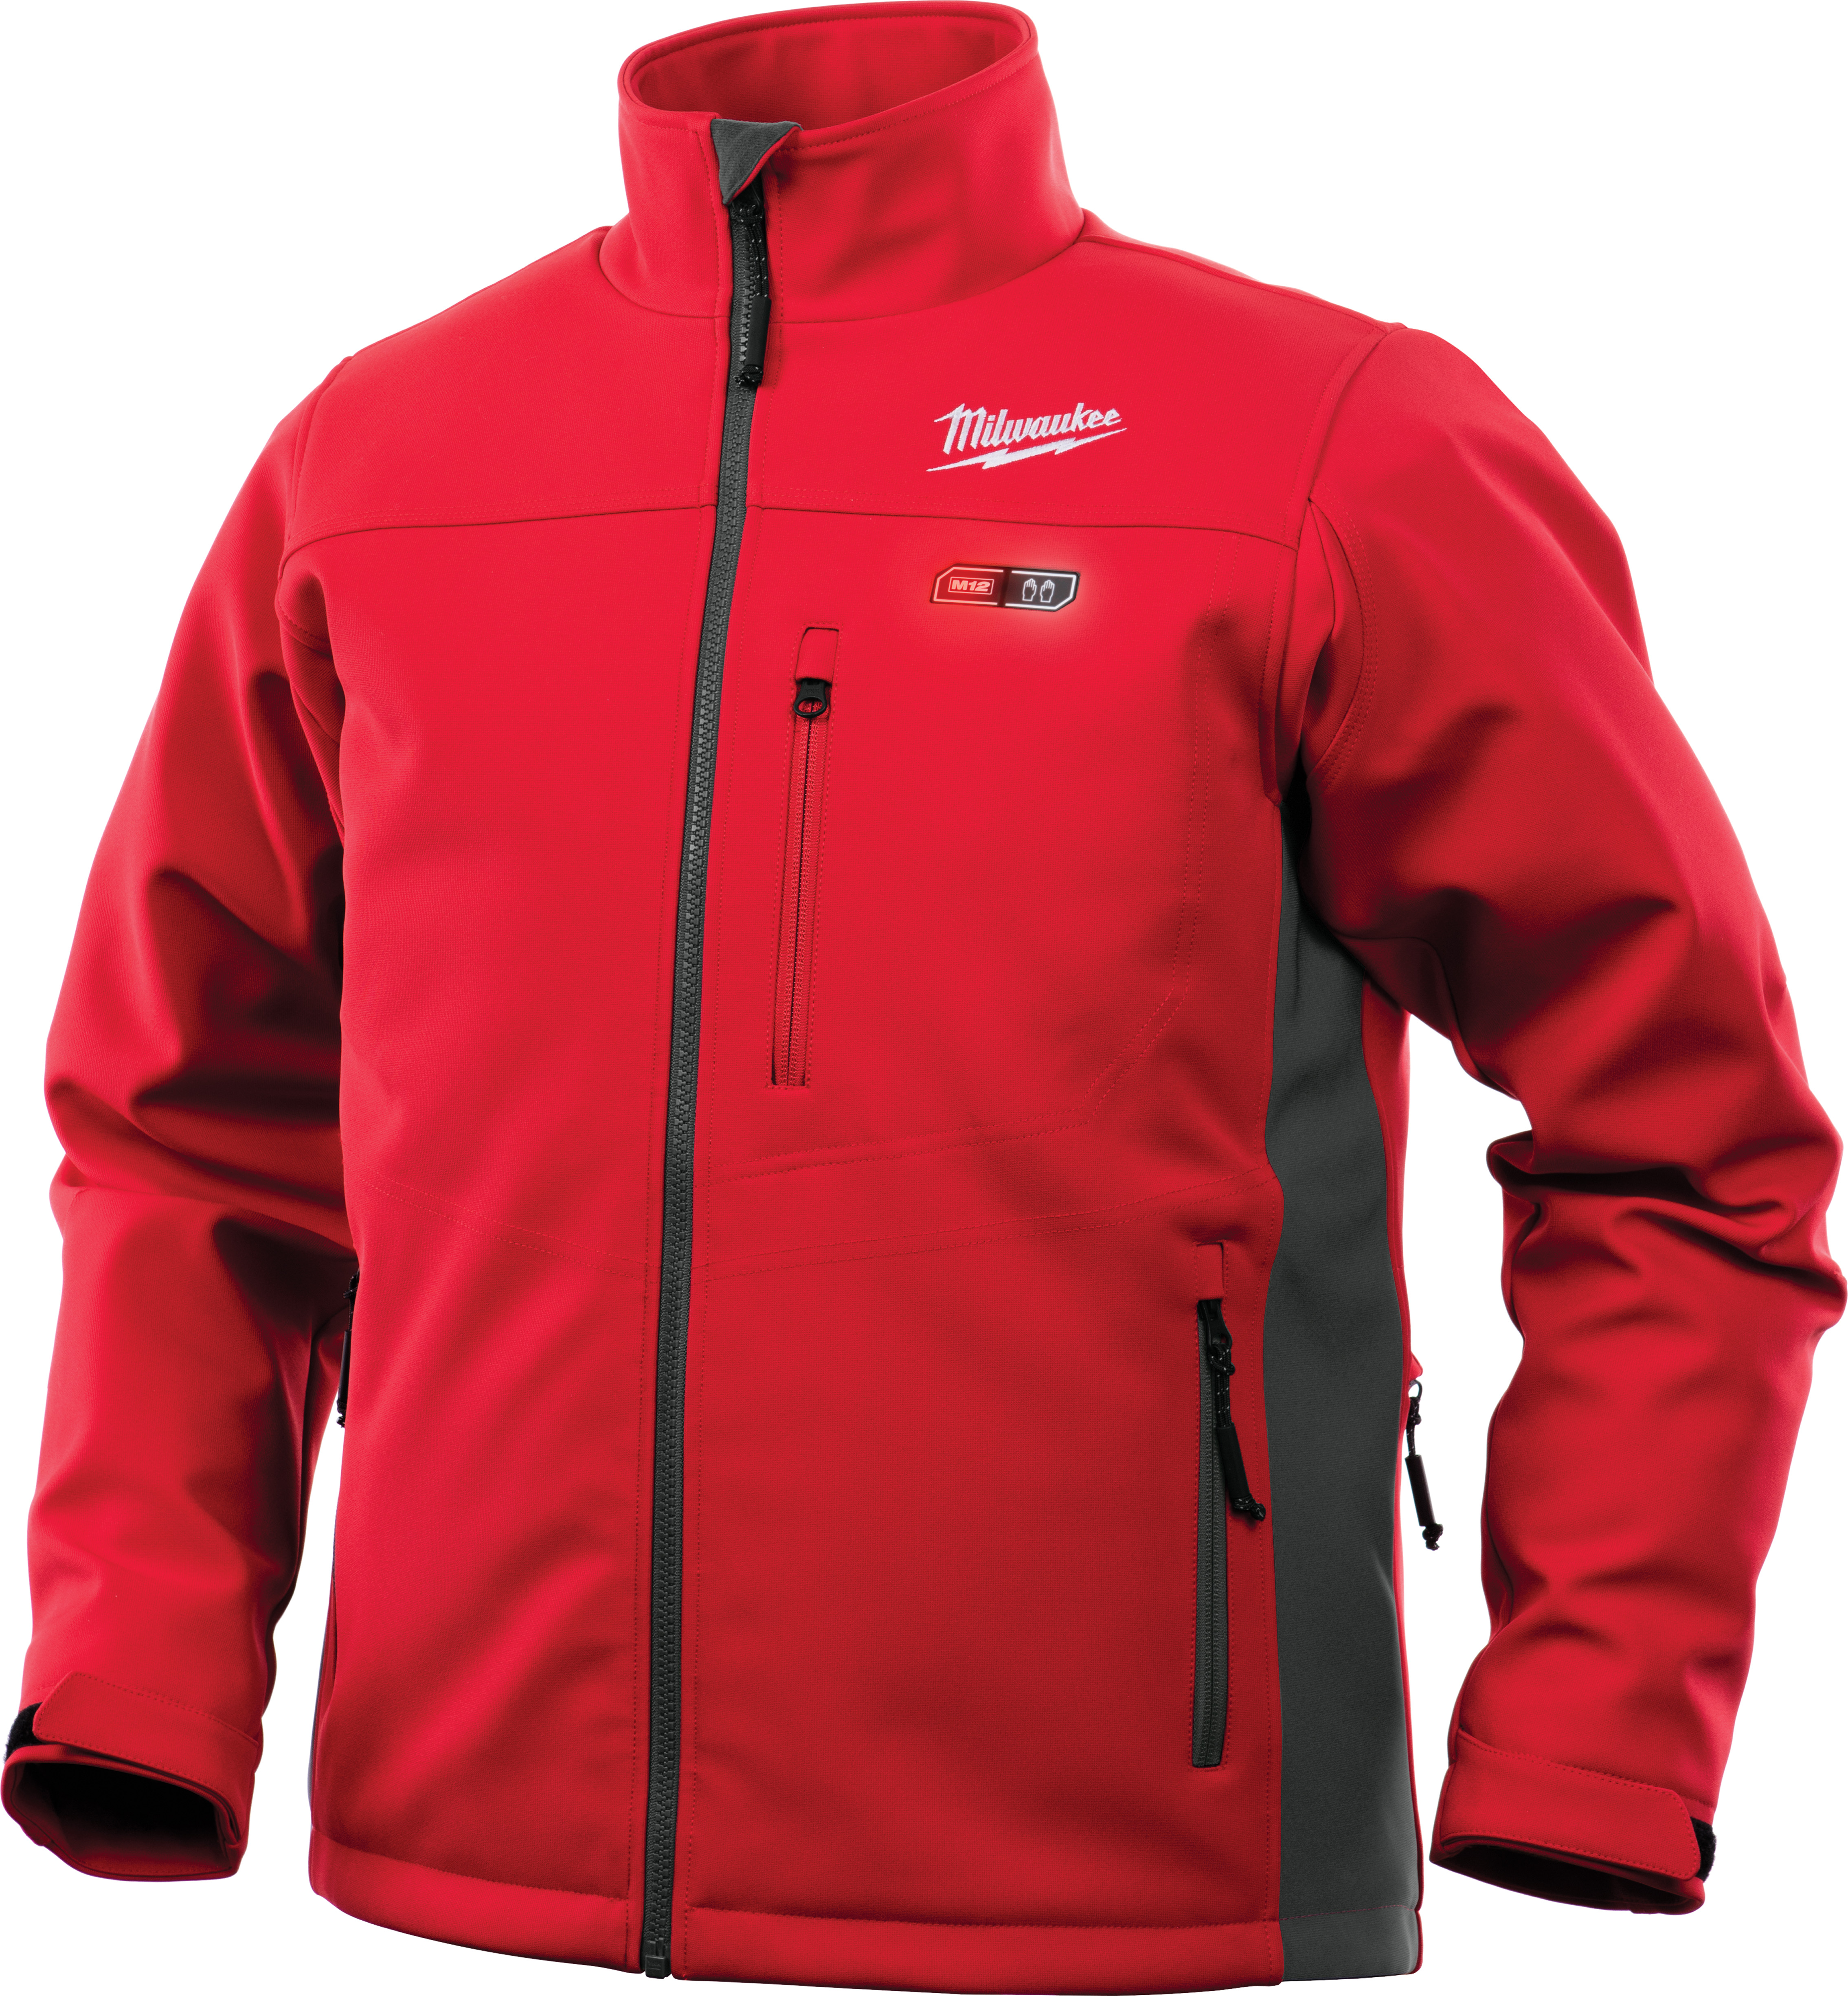 Powered by M12™ REDLITHIUM™ battery technology, Milwaukee® M12™ heated ToughShell™ jackets use carbon fiber heating elements to create and distribute heat to the chest, back, and front hand pockets. A one-touch LED controller allows users to select from three heat settings, delivering ideal heat for any environment. The new quick-heat function allows users to feel heat 3X faster than previous jackets and market competitors. For use in abrasive environments, ToughShell™ stretch polyester delivers 5X longer life than previous QuietShell jackets, and provides wind and water resistance to survive the elements. 22521